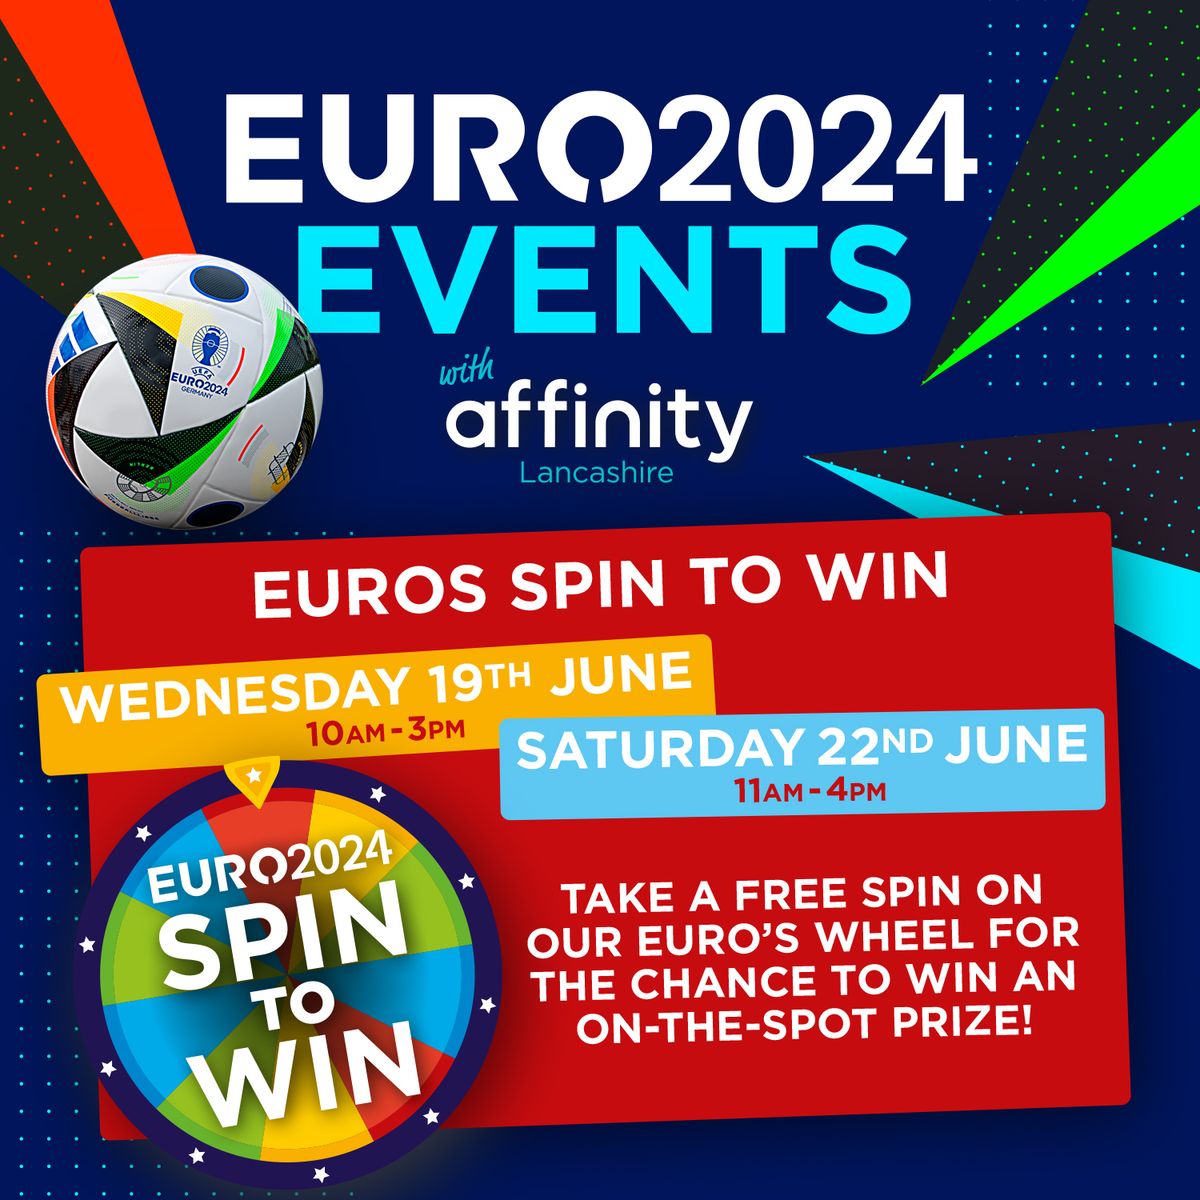 Euros Spin to Win